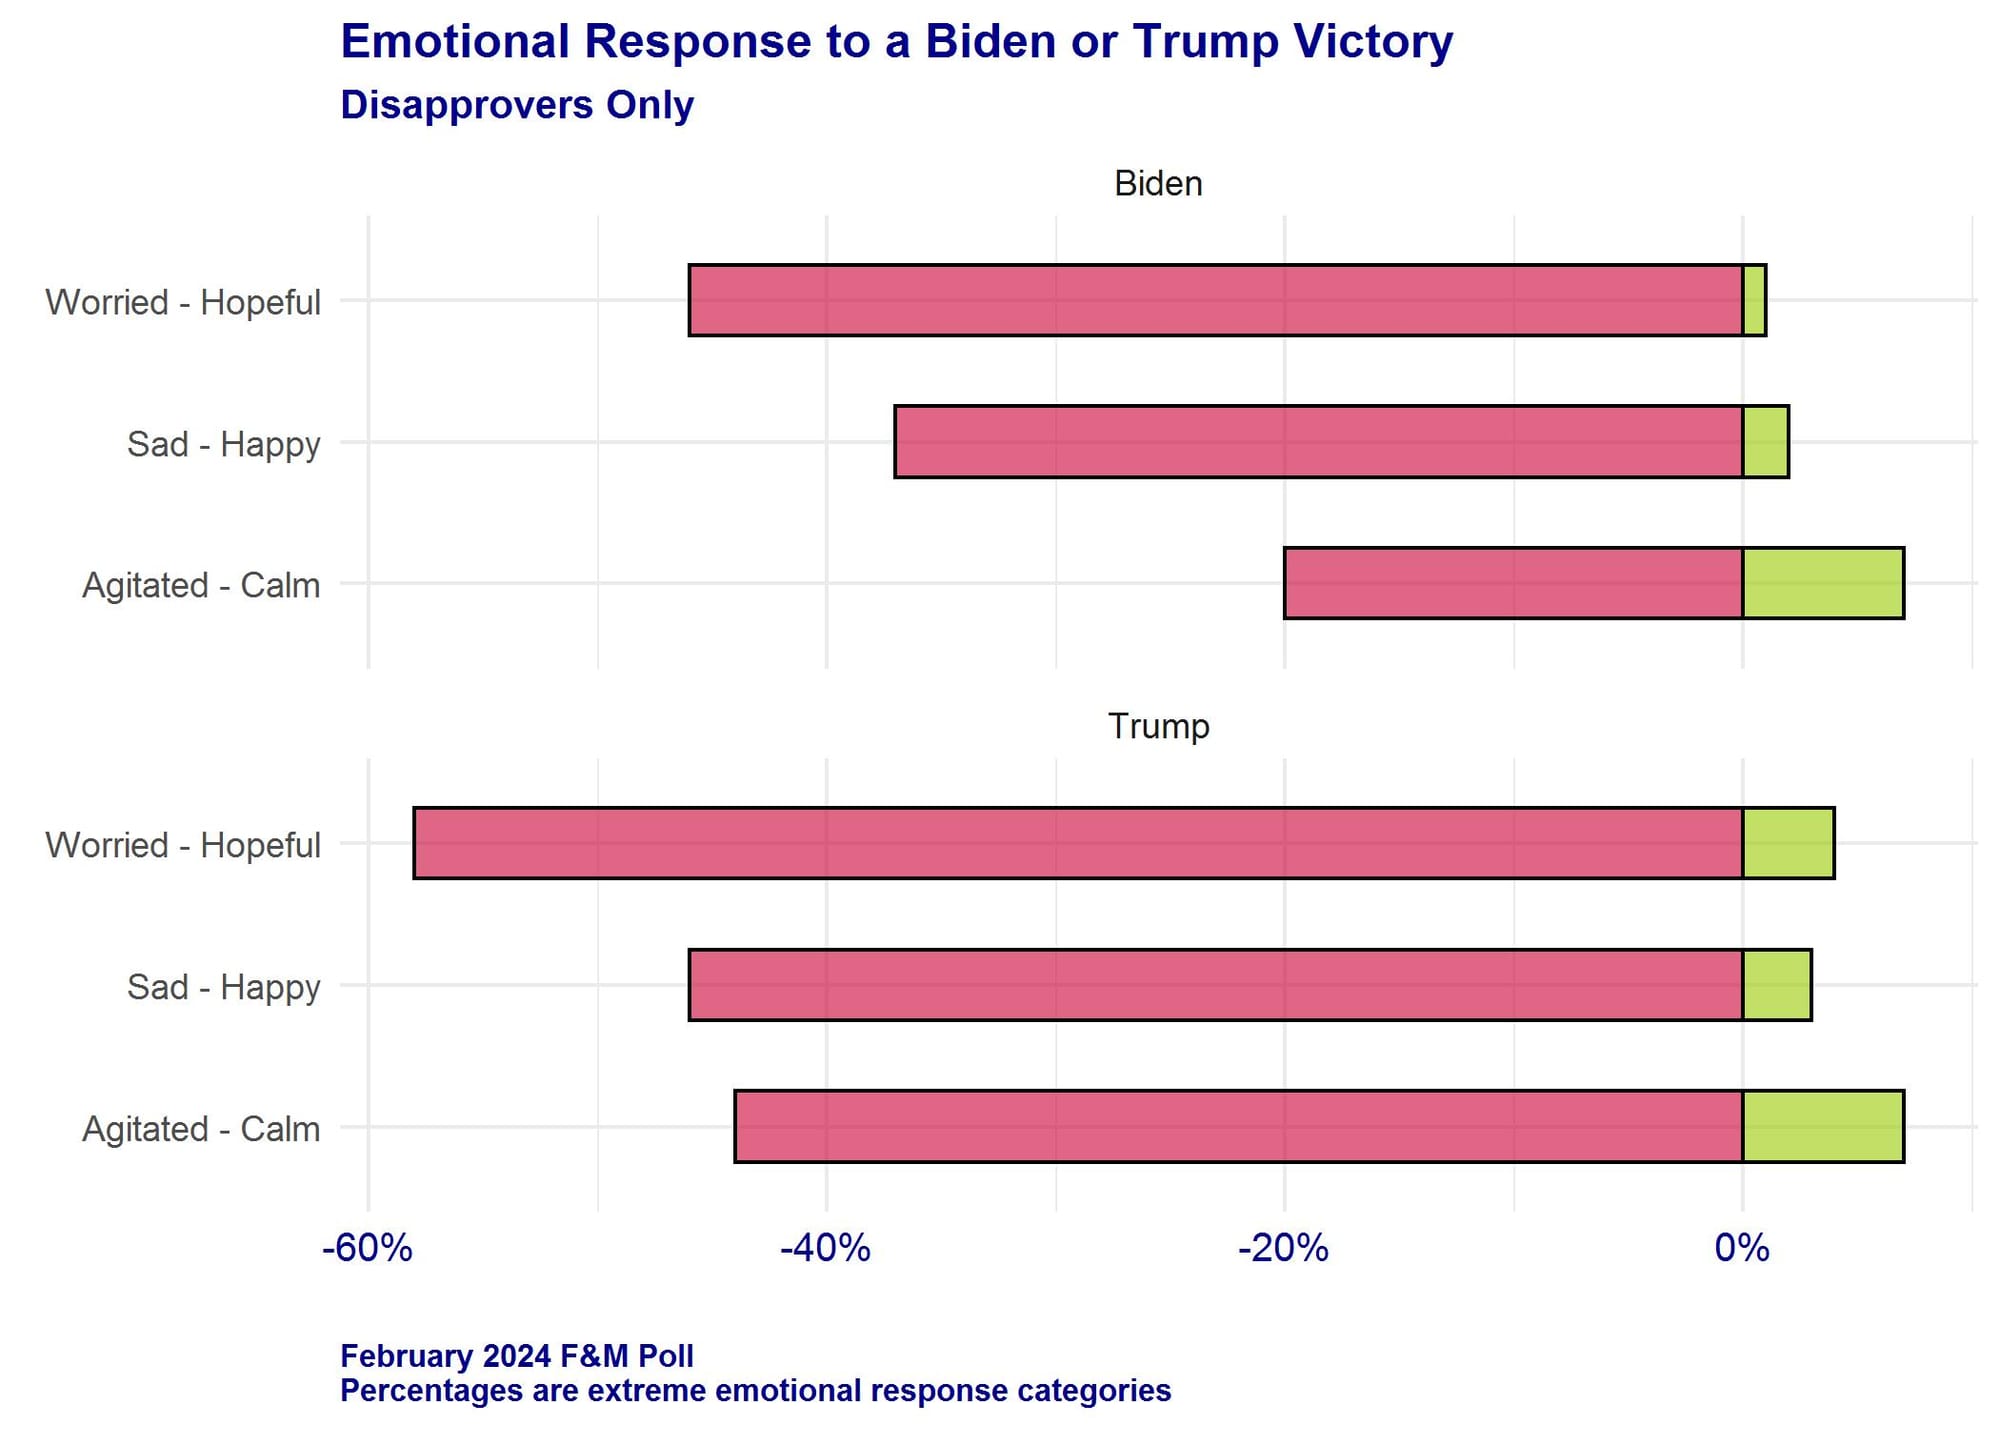 Figure 3. Bar graph using February 2024 F&M Poll data to show the emotional responses to a Biden or Trump victory of voters who disapprove of both candidates. Response categories are happy-sad, worried-hopeful, and agitated-calm.